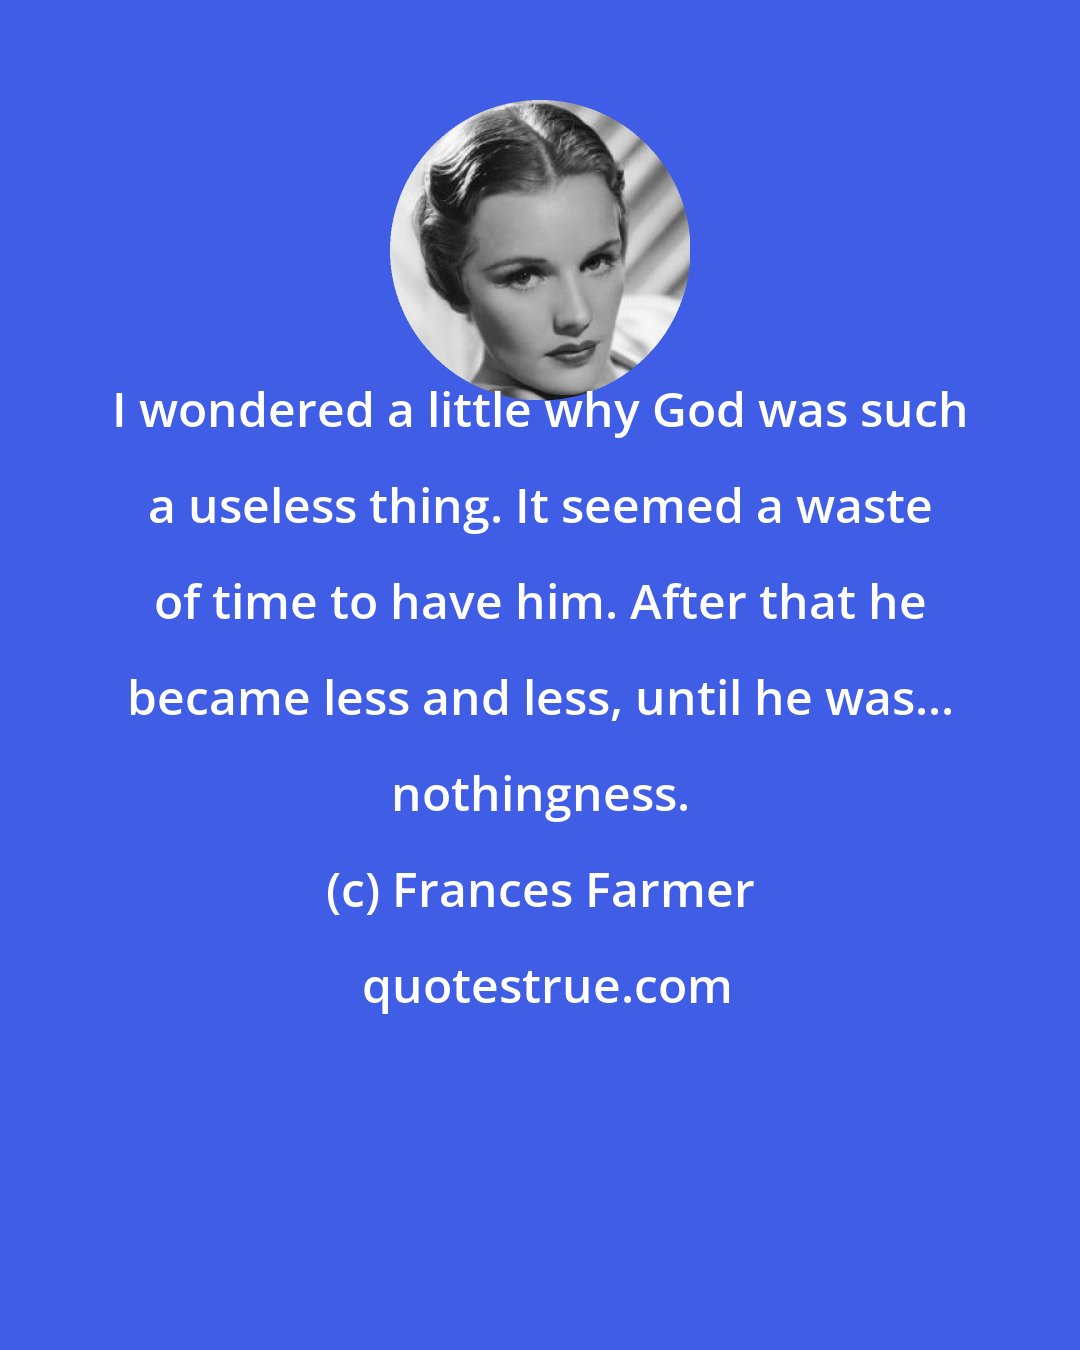 Frances Farmer: I wondered a little why God was such a useless thing. It seemed a waste of time to have him. After that he became less and less, until he was... nothingness.